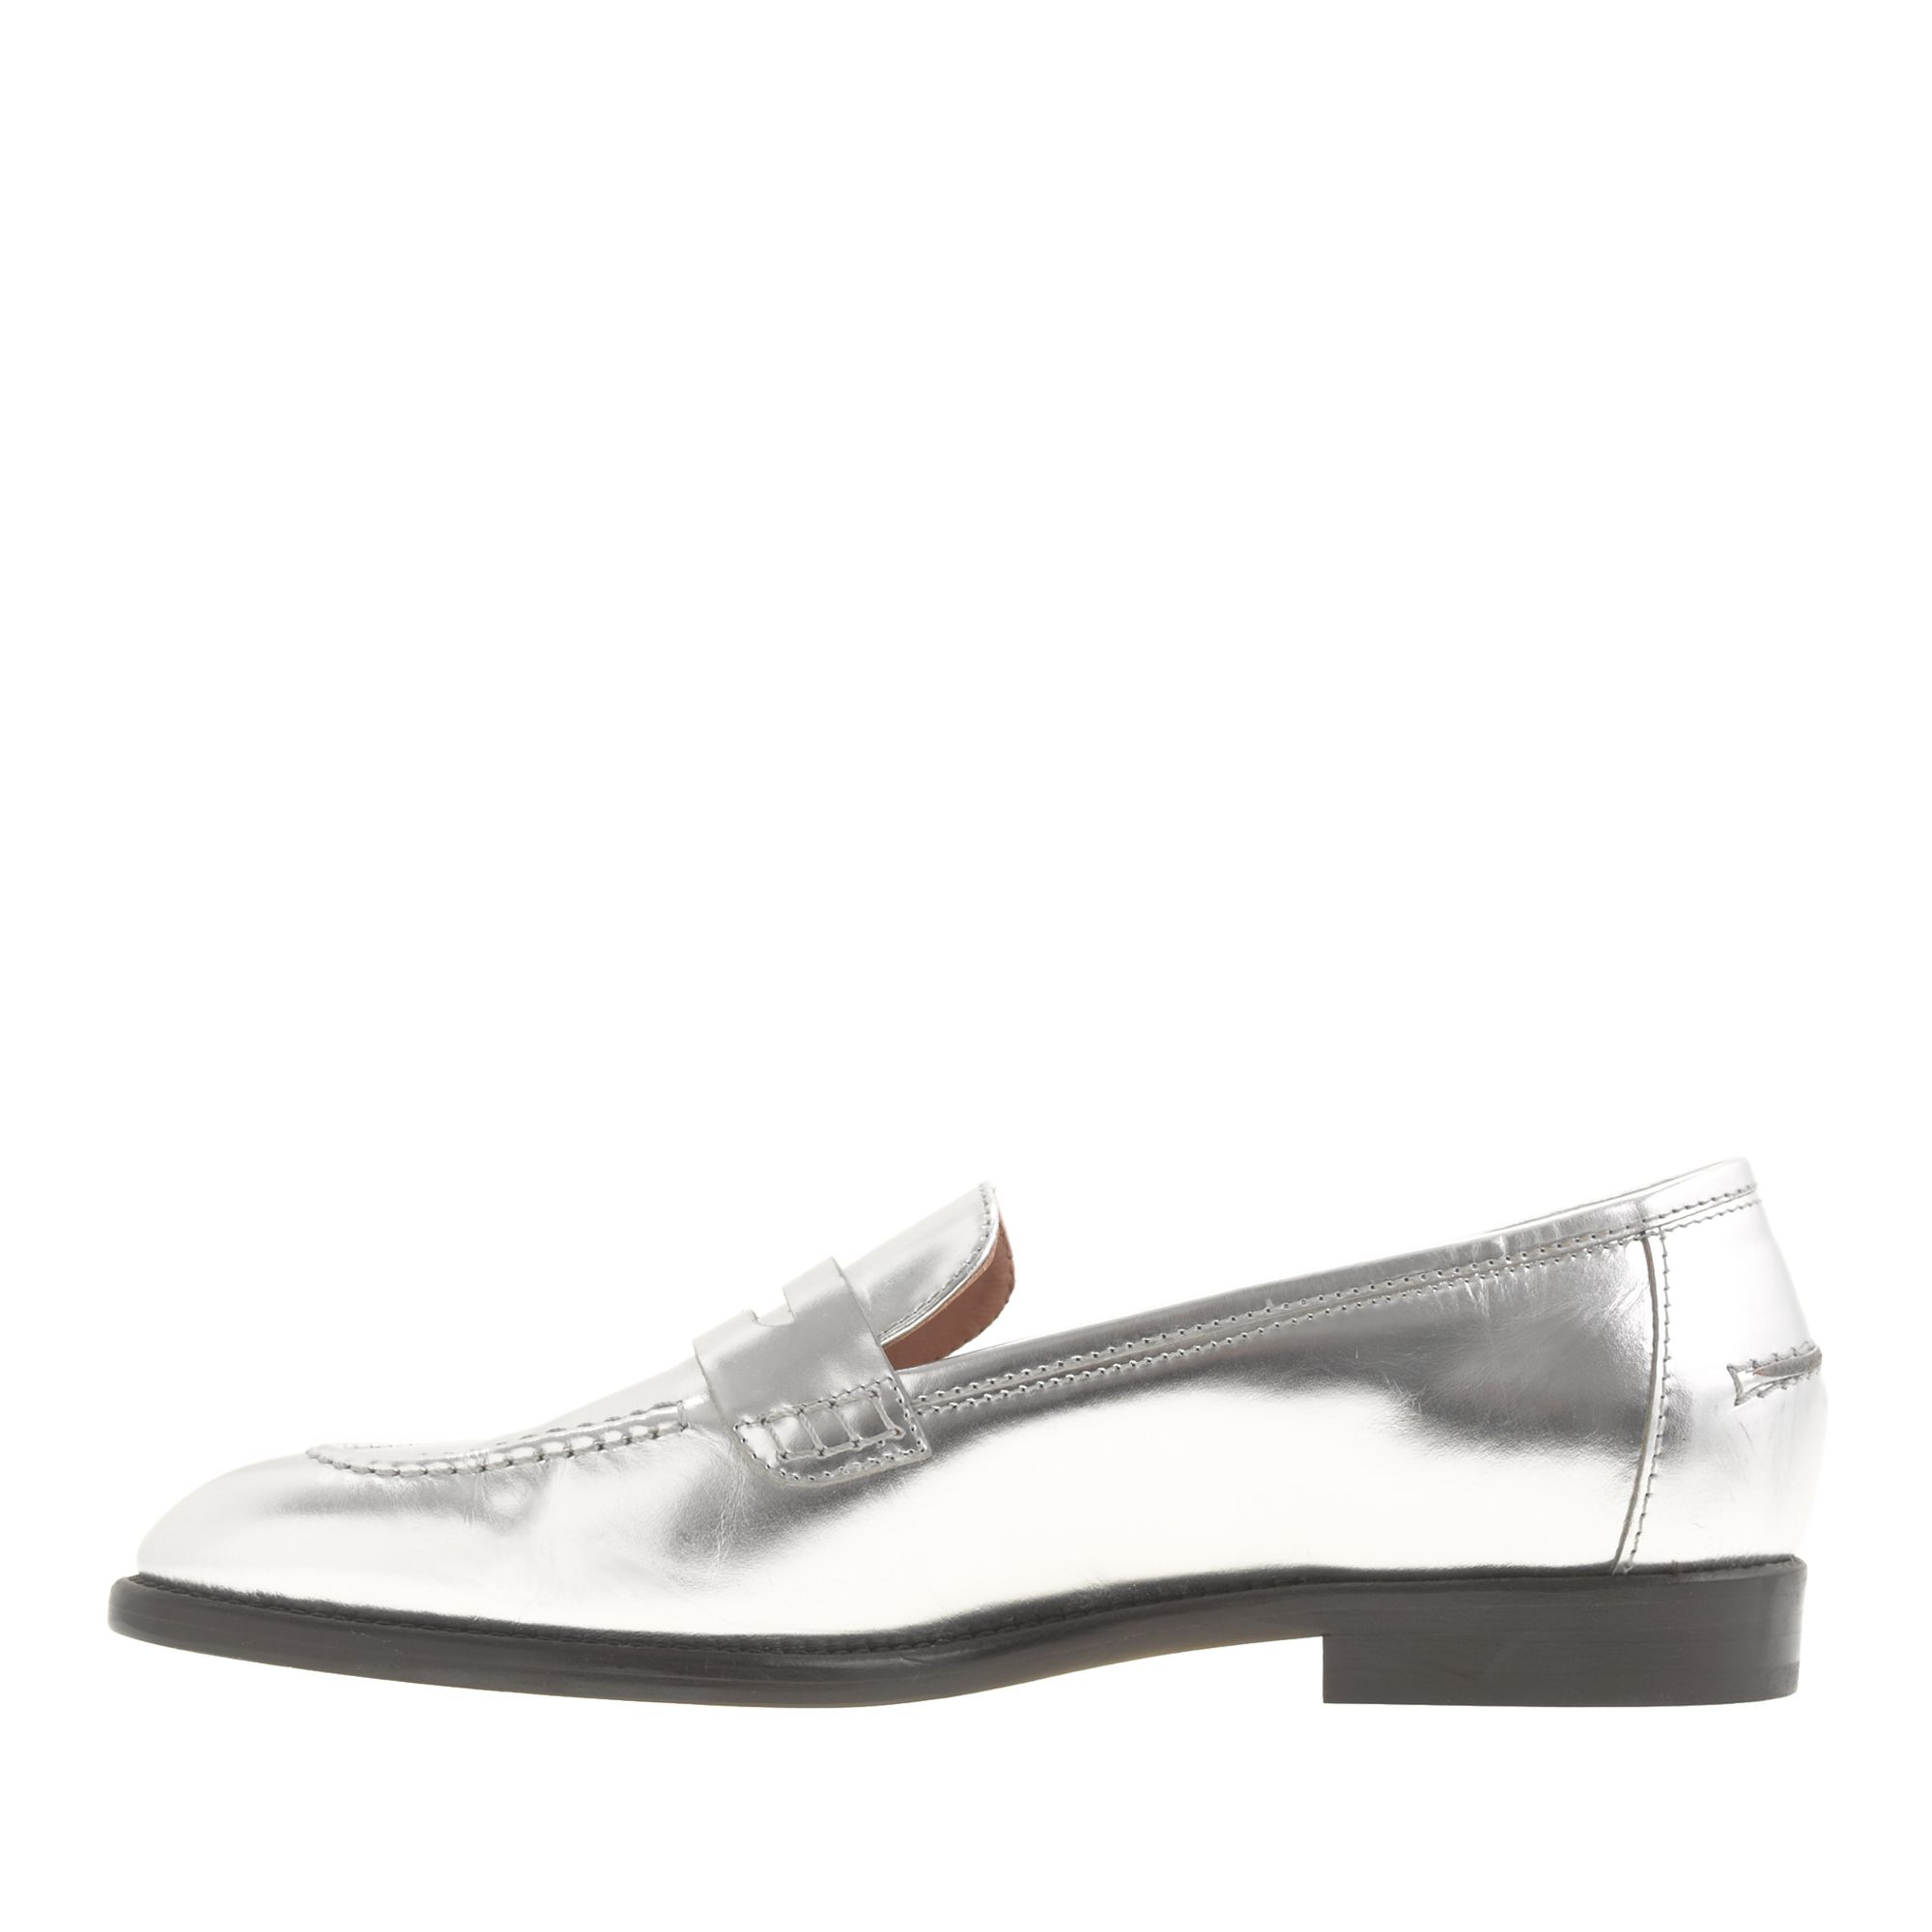 Lyst - J.Crew Preorder Collection Mirror Metallic Penny Loafers in Metallic